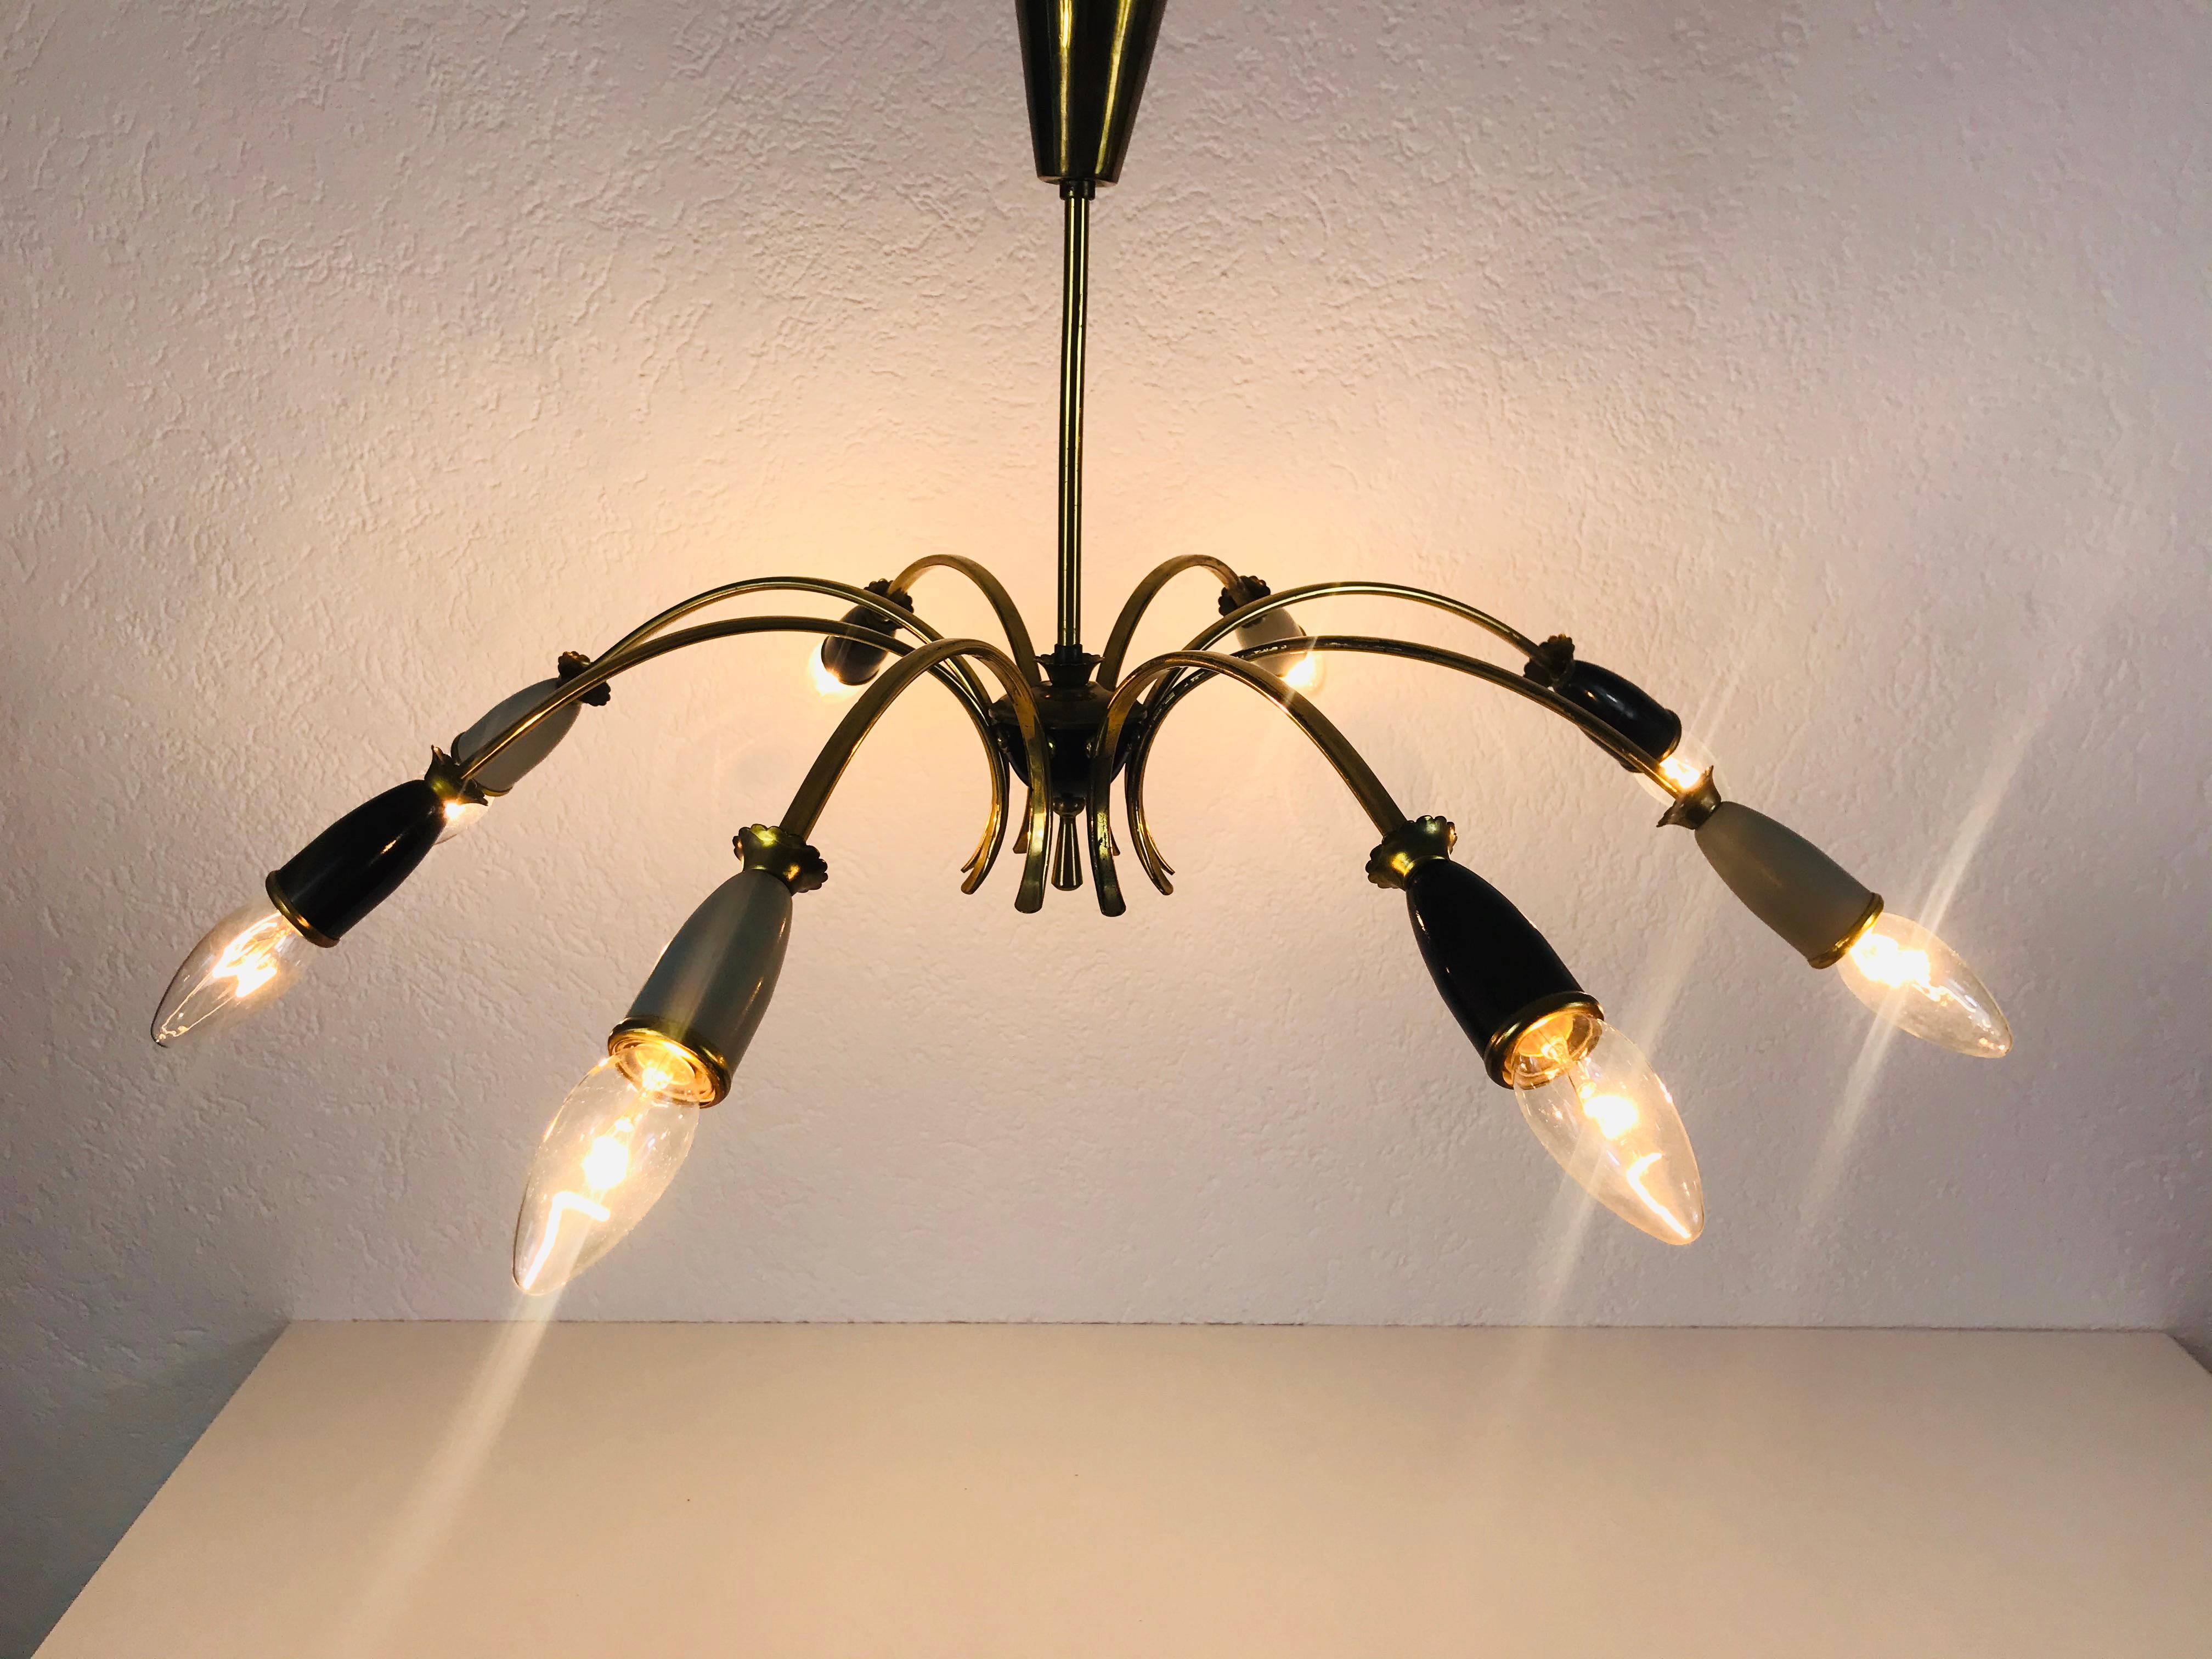 A Sputnik chandelier made in Germany in the 1950s. It is fascinating with its eight brass arms, each of it with an E14 light bulb. The arms have a grey and black color. The shape of the light is similiar to a spider. 

Very good vintage